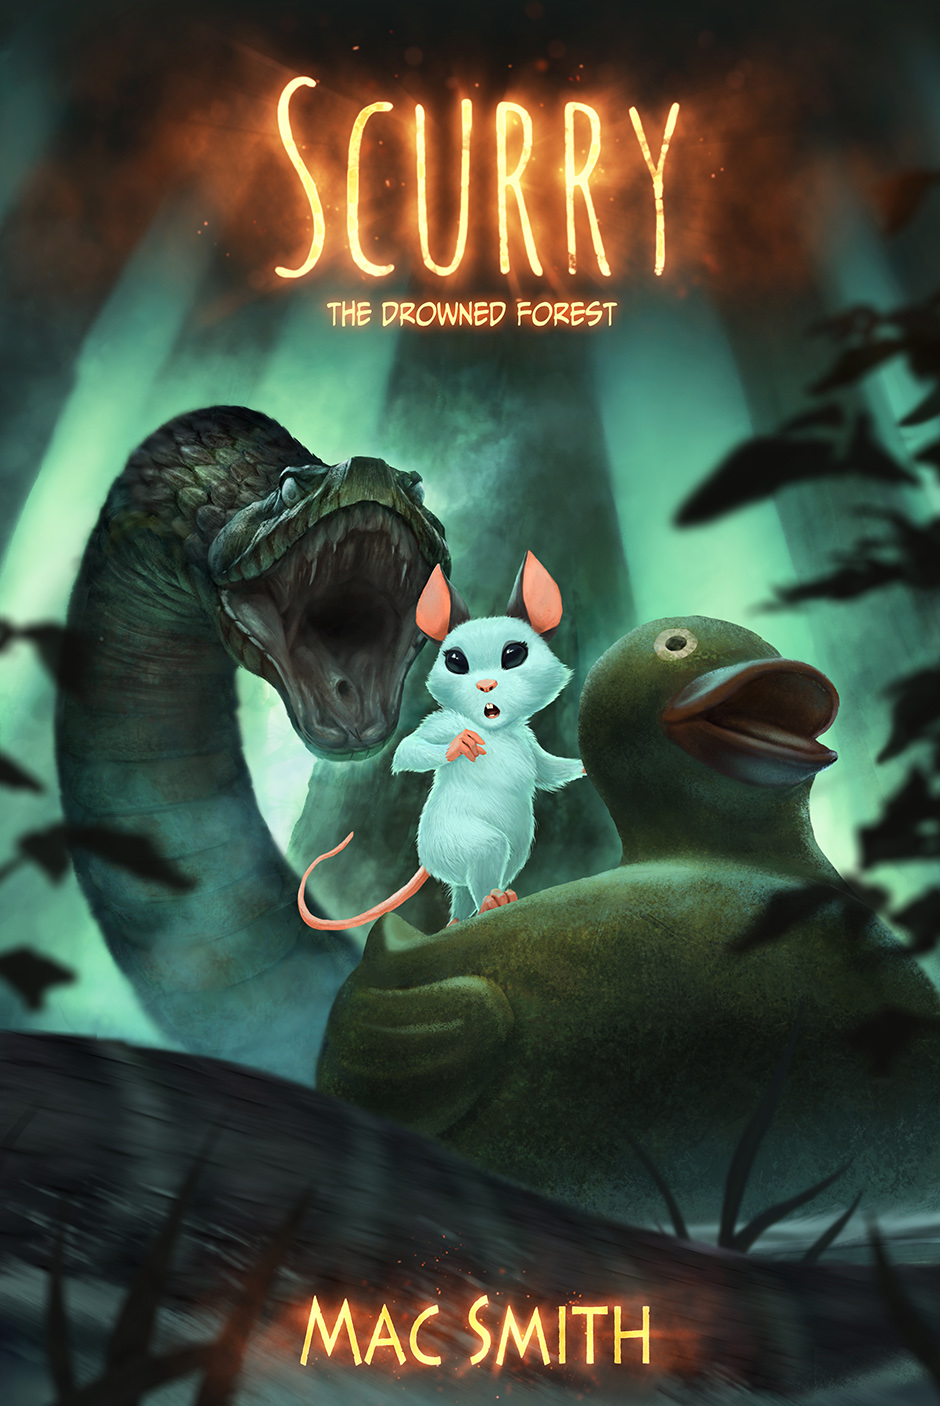 Scurry: The Drowned Forest Cover by BMacSmith on DeviantArt